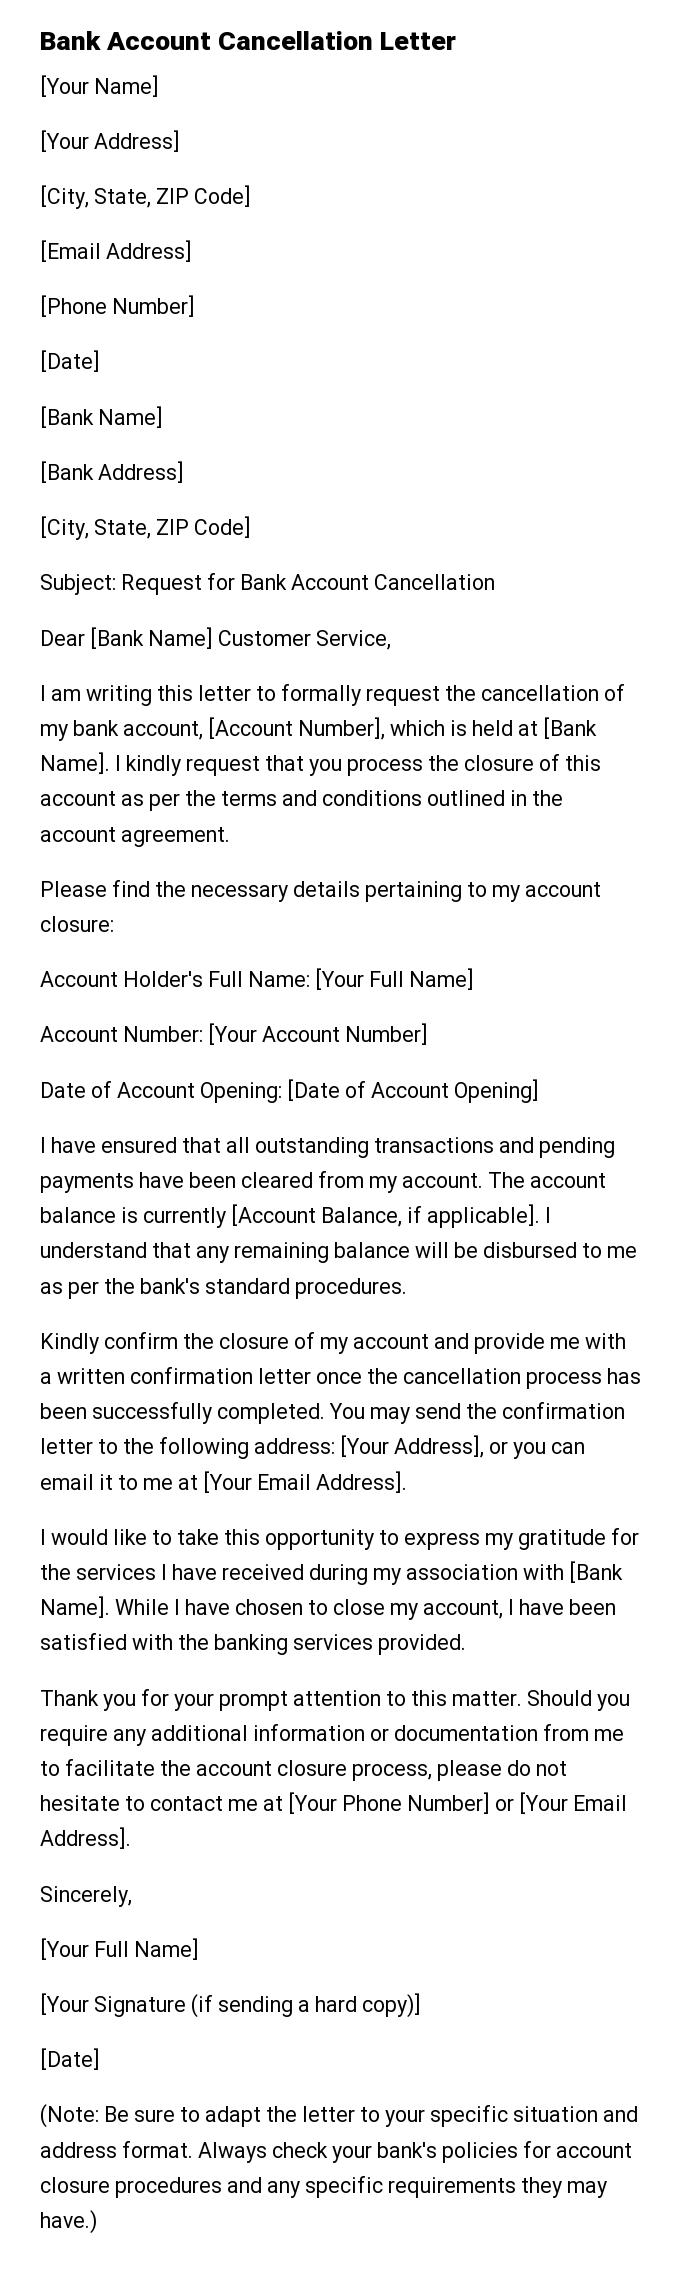 Bank Account Cancellation Letter